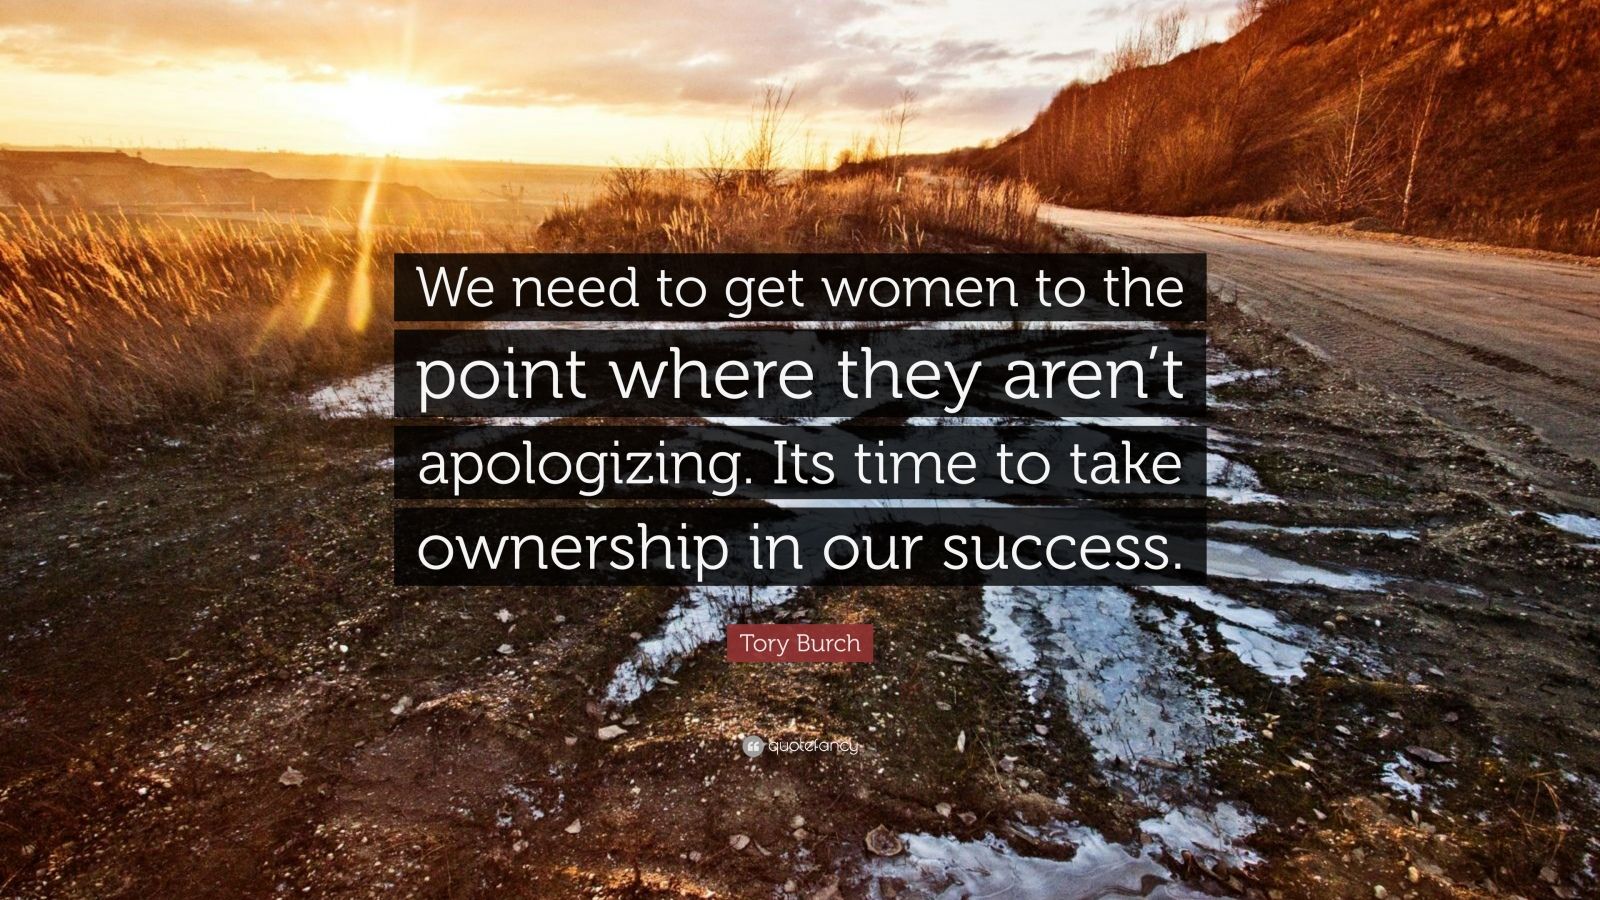 Tory Burch Quote: “We need to get women to the point where they aren't  apologizing. Its time to take ownership in our success.”